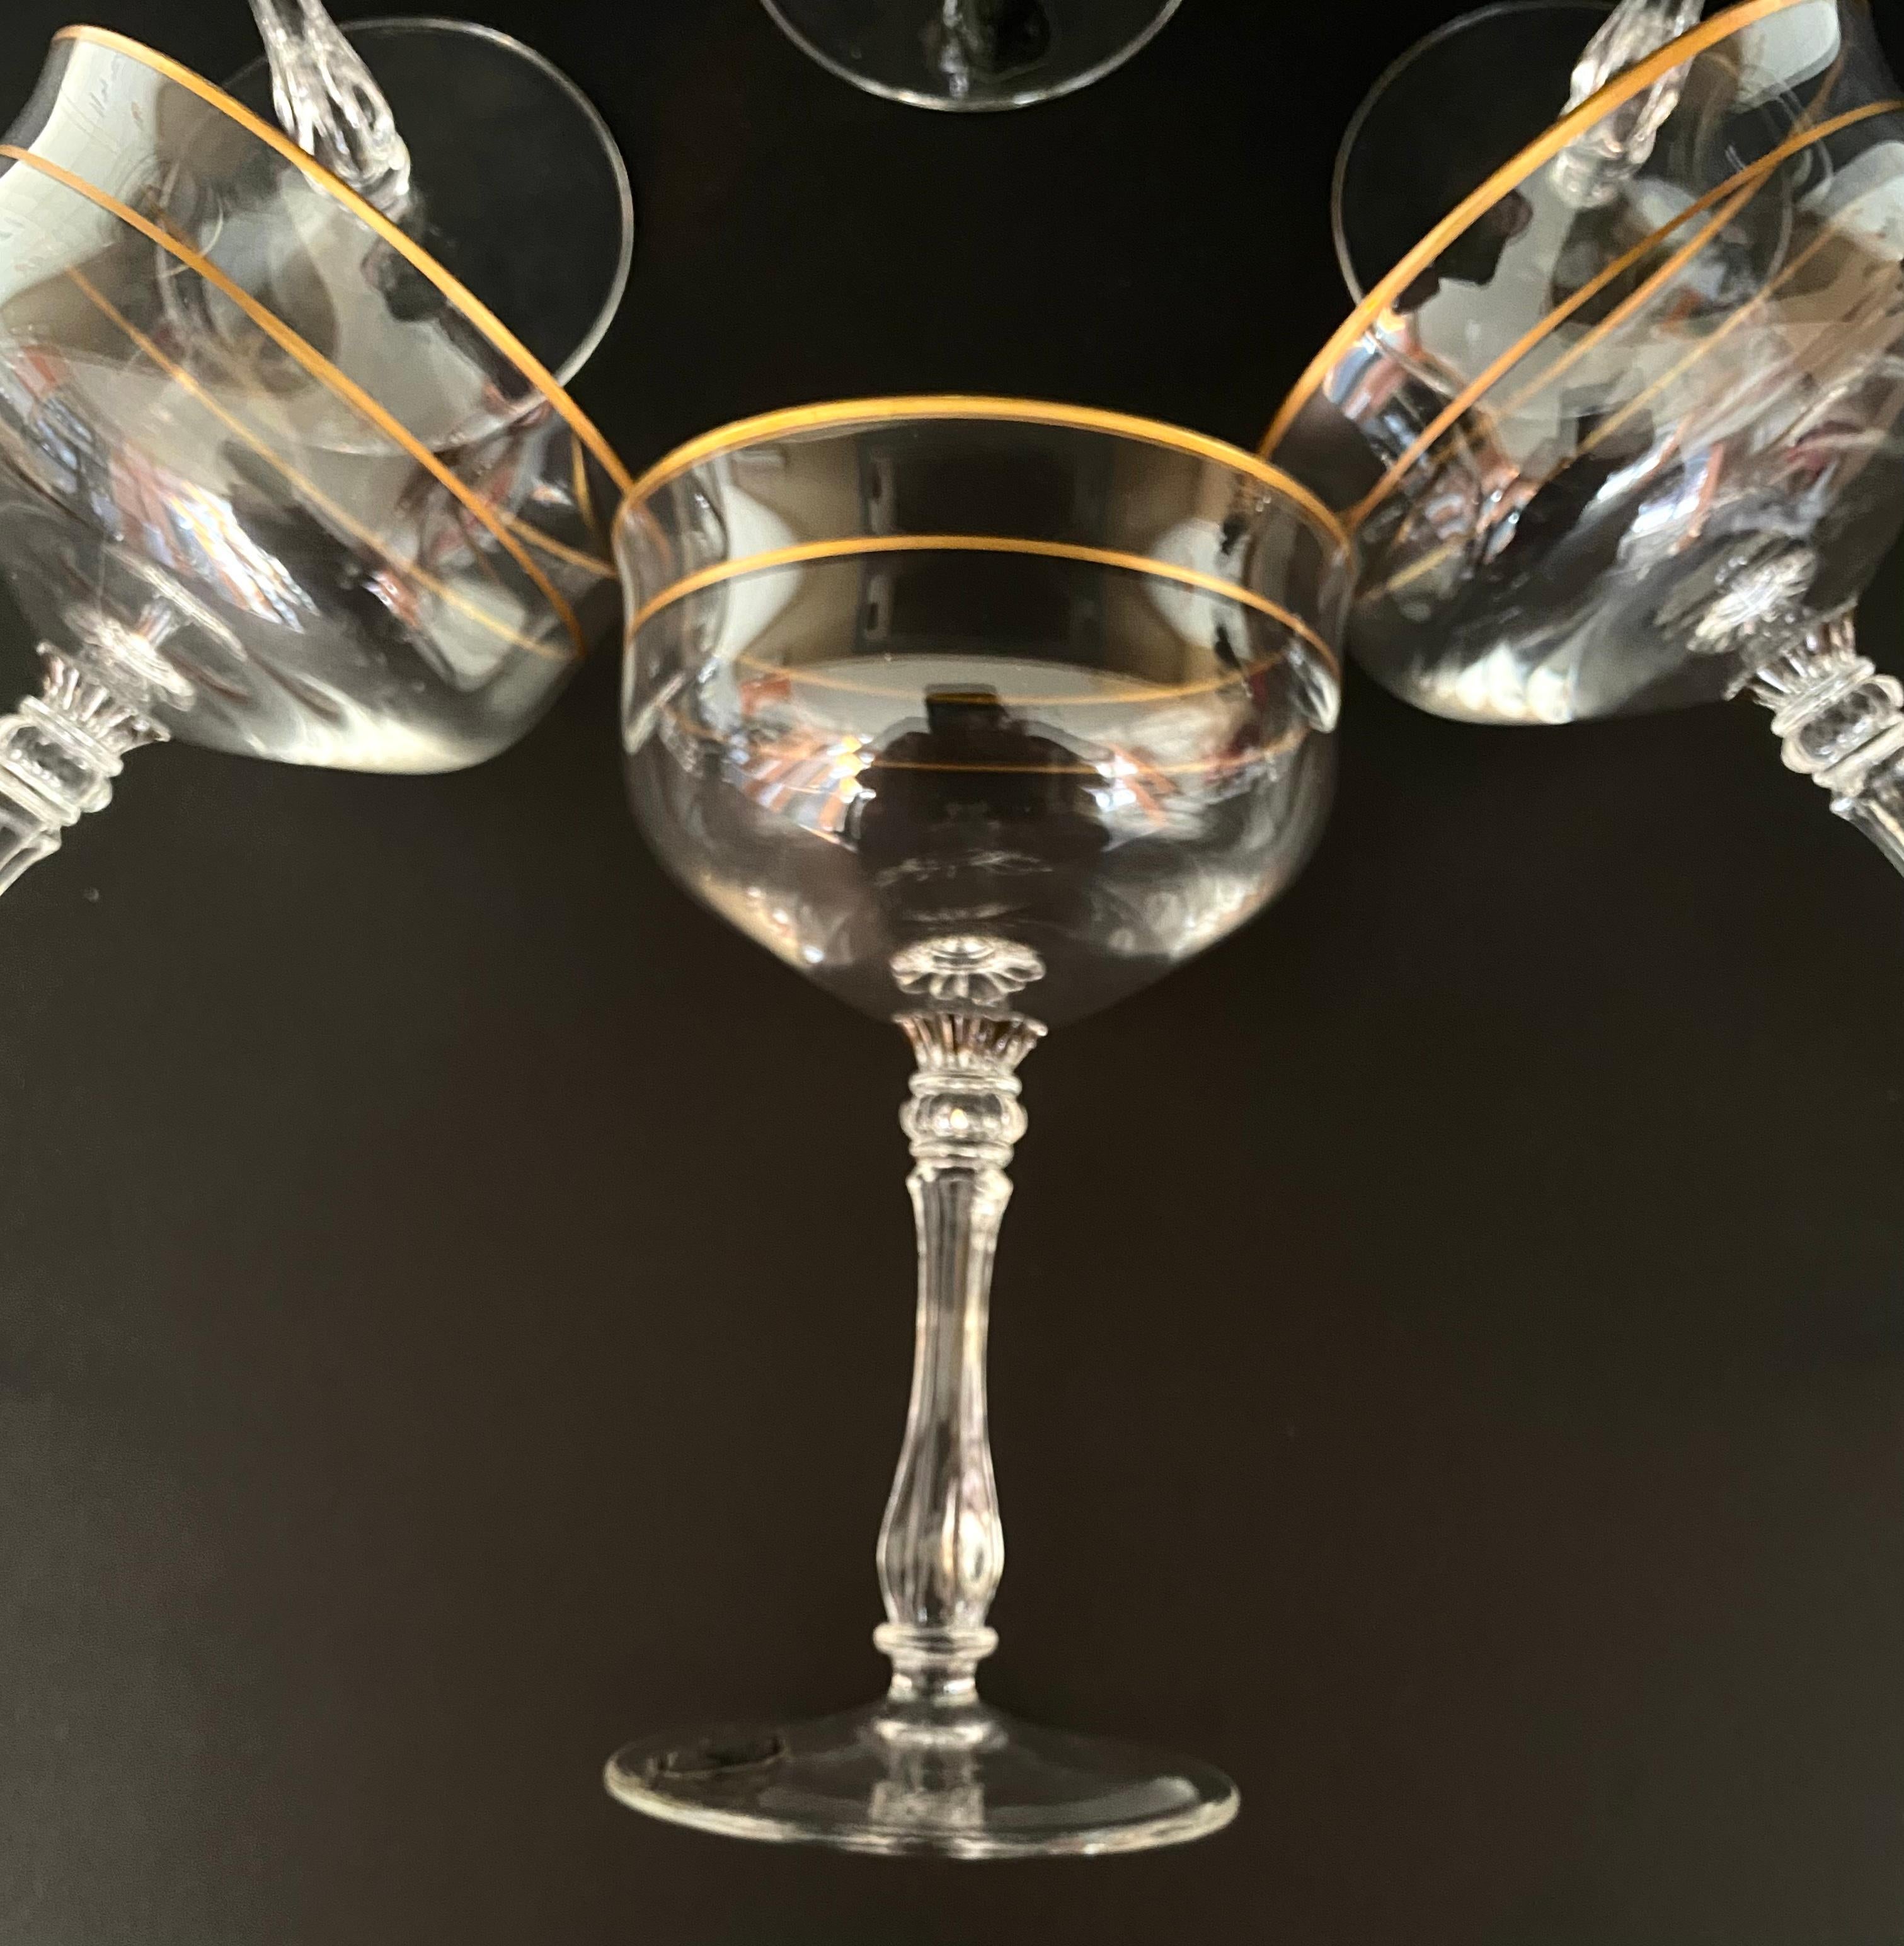 Beautiful vintage champagne glasses from the famous German factory Gallo, around 1970s, made of clear crystal with a golden border.

This set of 6 glasses has an elegant appearance and is perfect for serving a festive drink.

A set of champagne